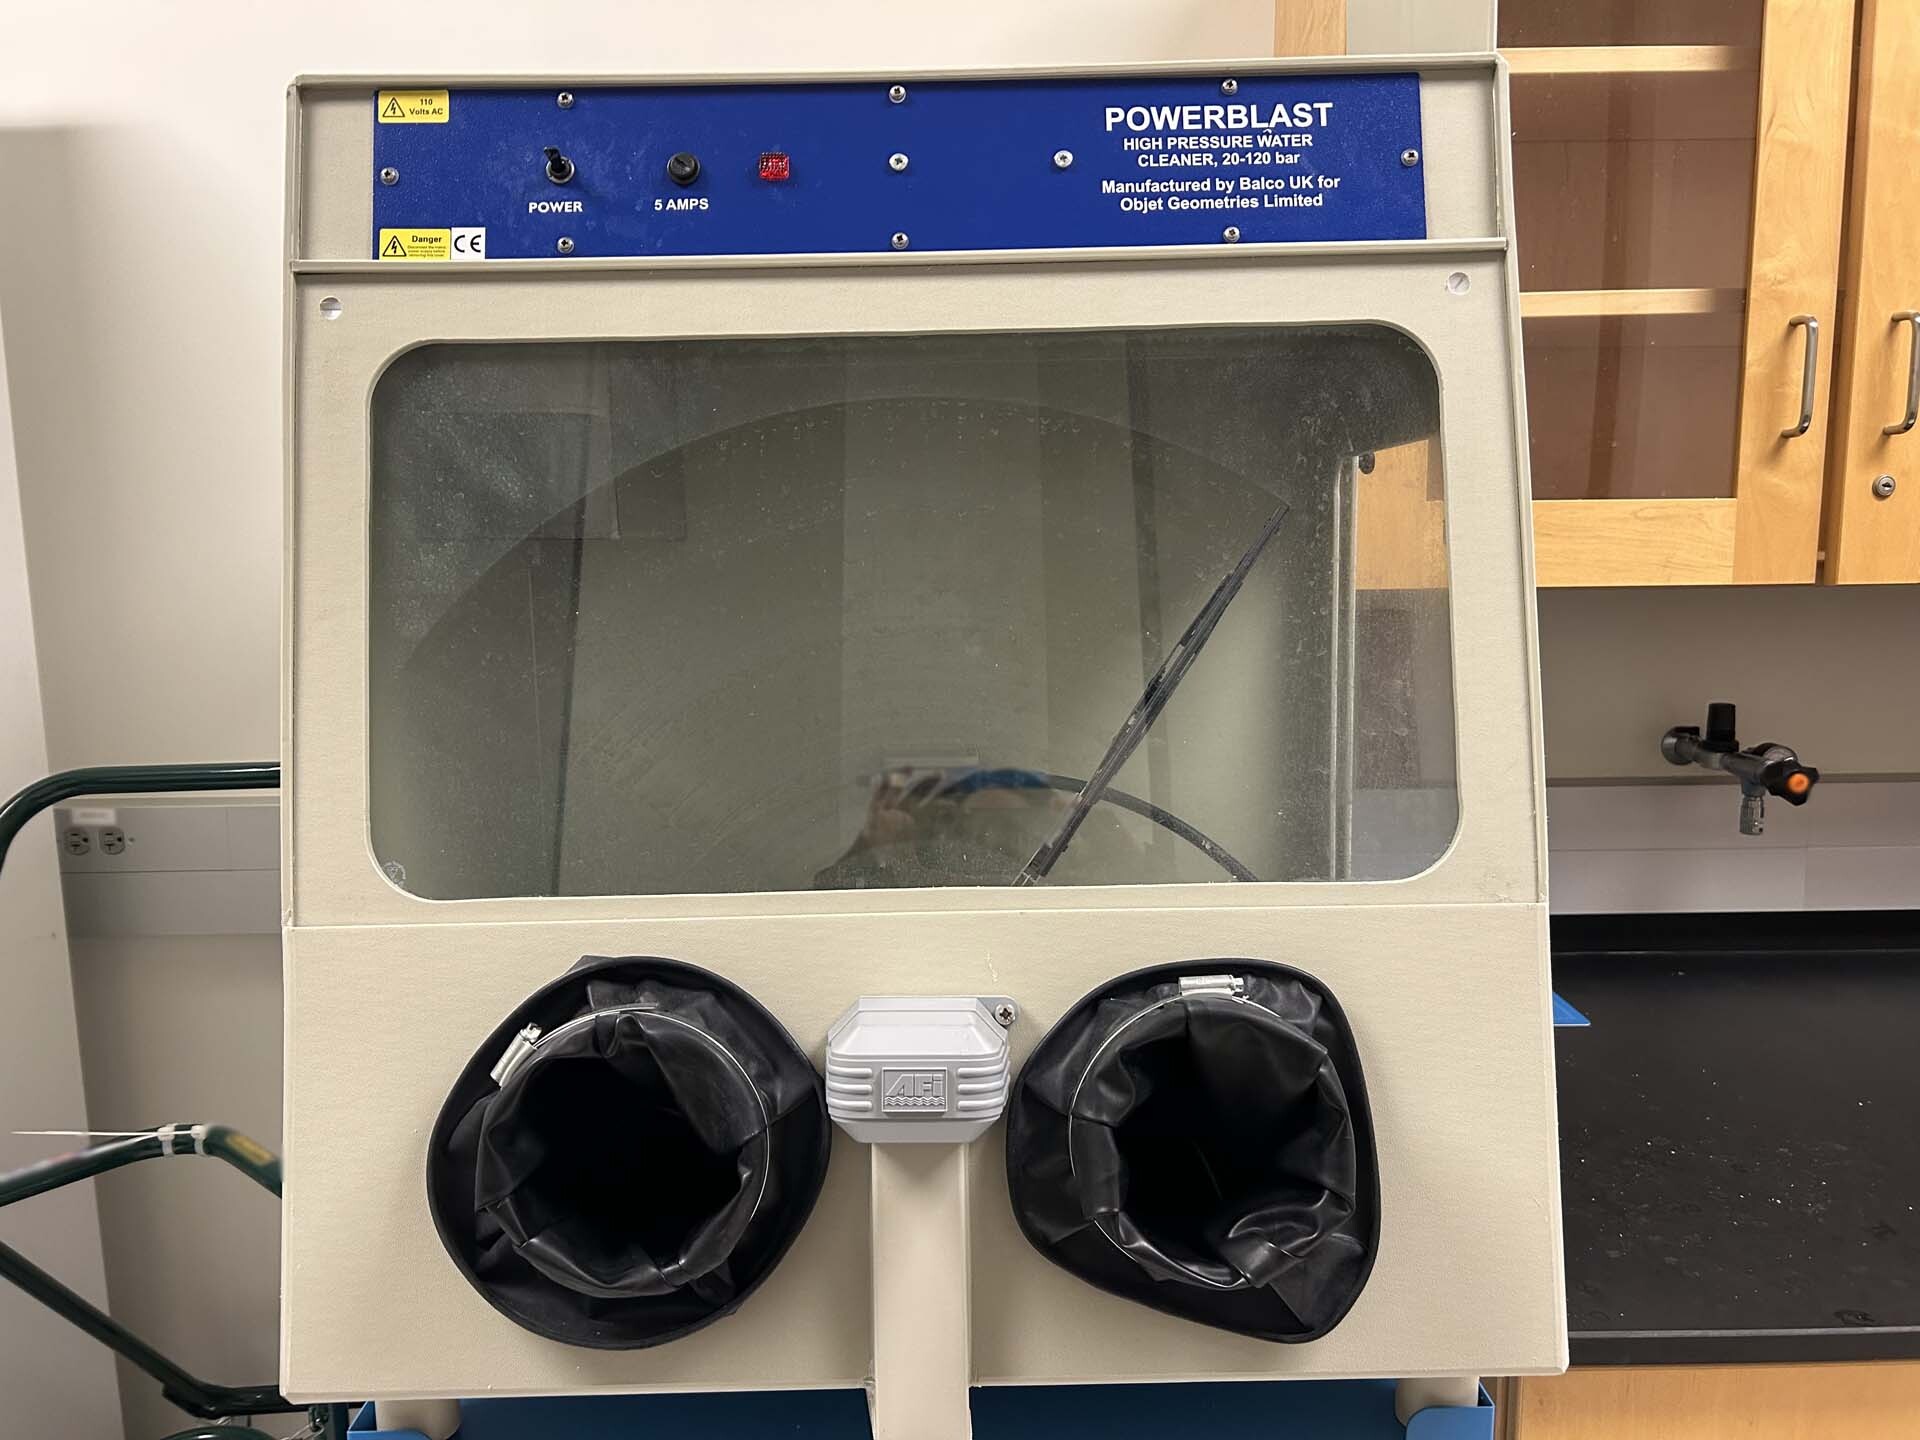 Photo Used STRATASYS Objet500 Connex3 For Sale